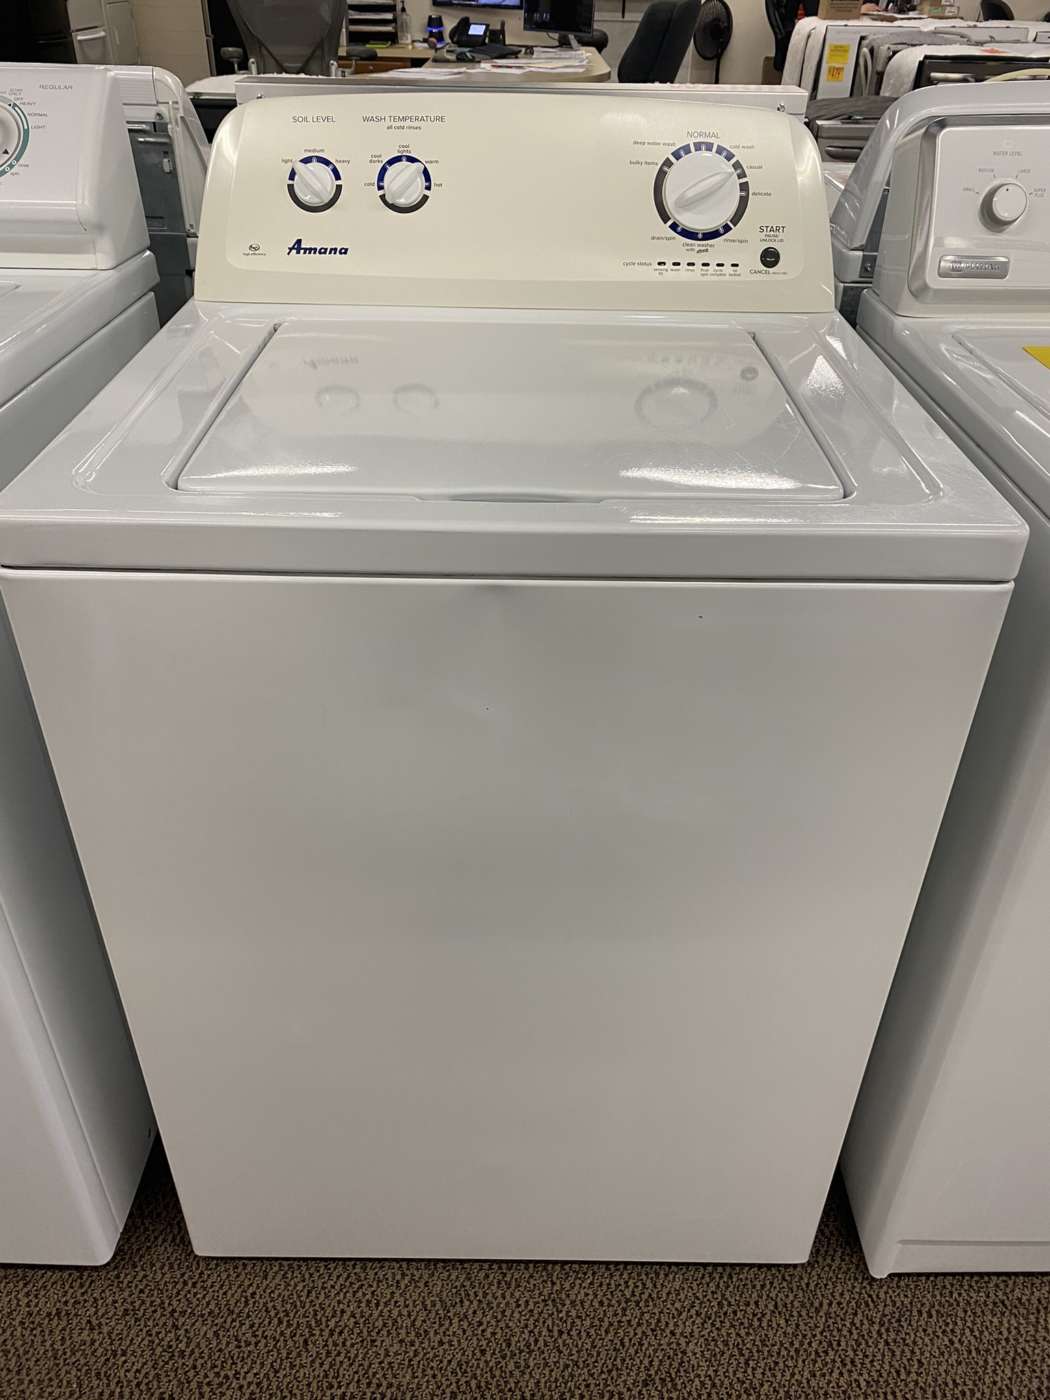 Reconditioned AMANA 3.5 Cu. Ft. Top-Load Washer – White